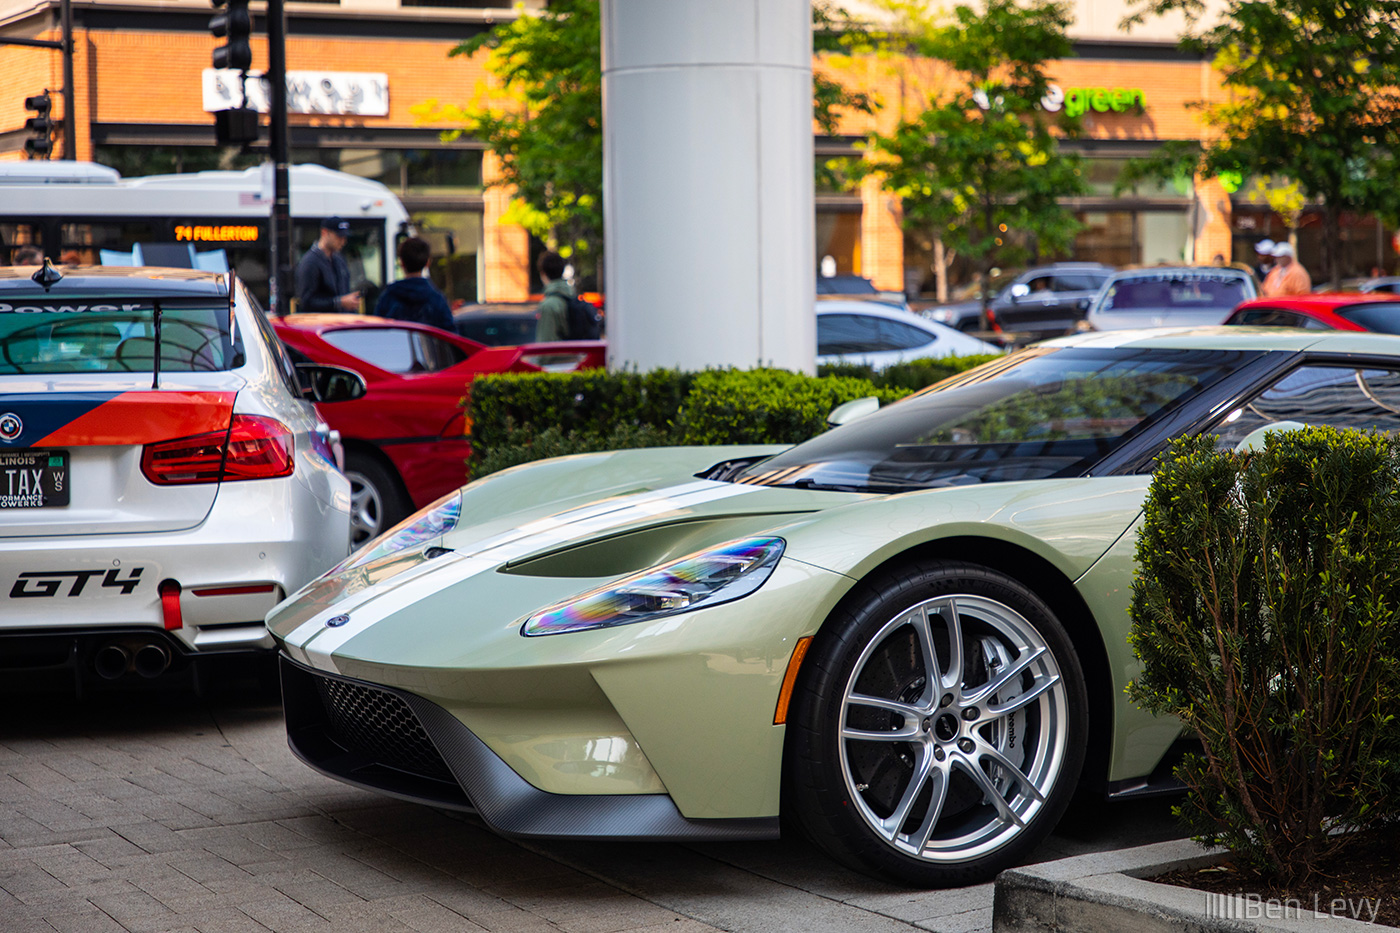 Green Ford GT Peeking out of Bushes